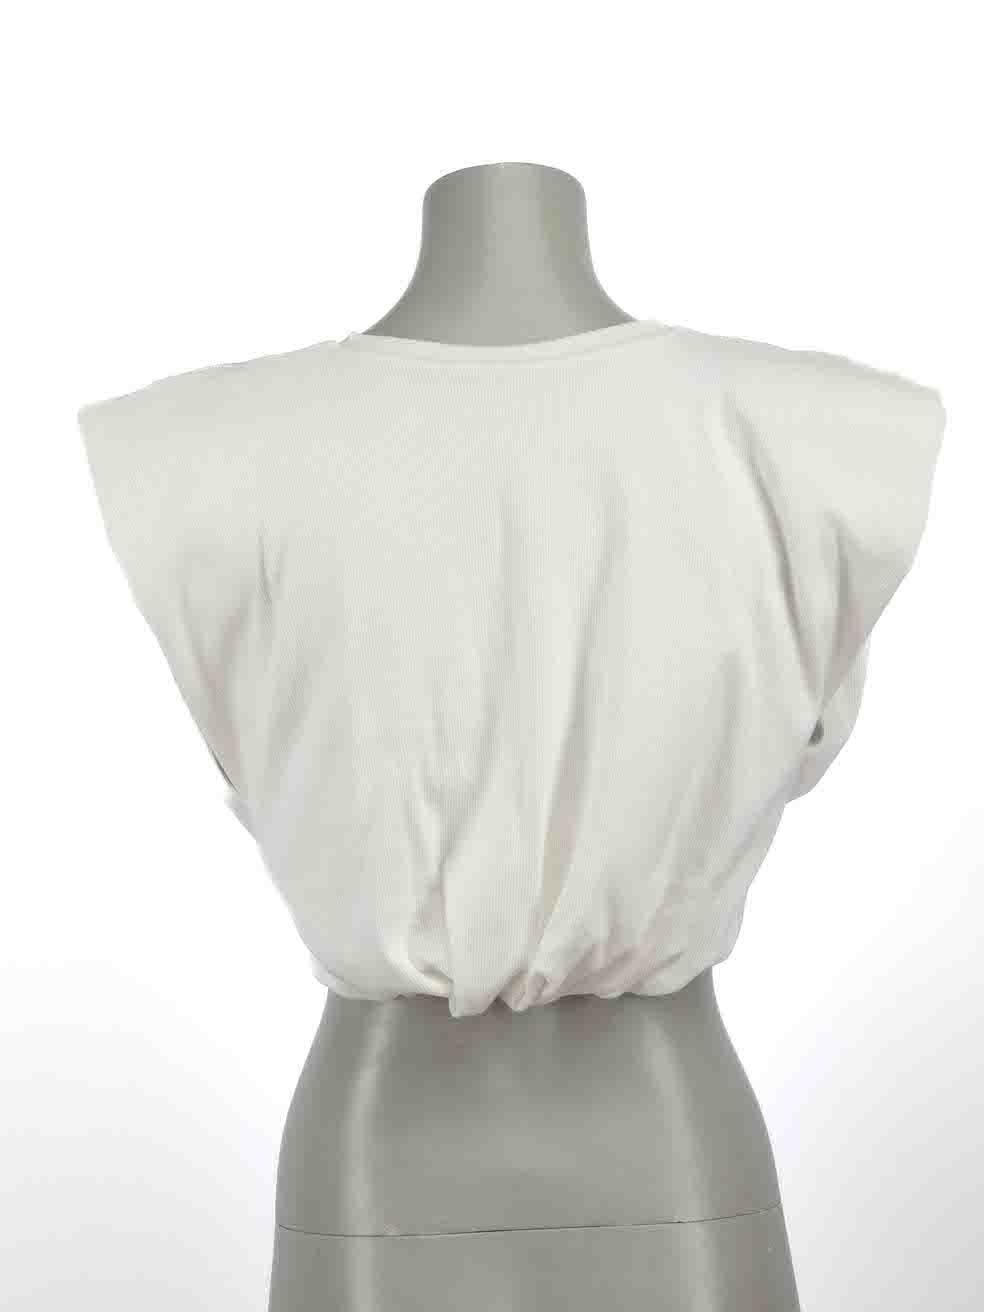 Gray Johanna Ortiz White Pad Shoulder Ruched Crop Top Size XS For Sale